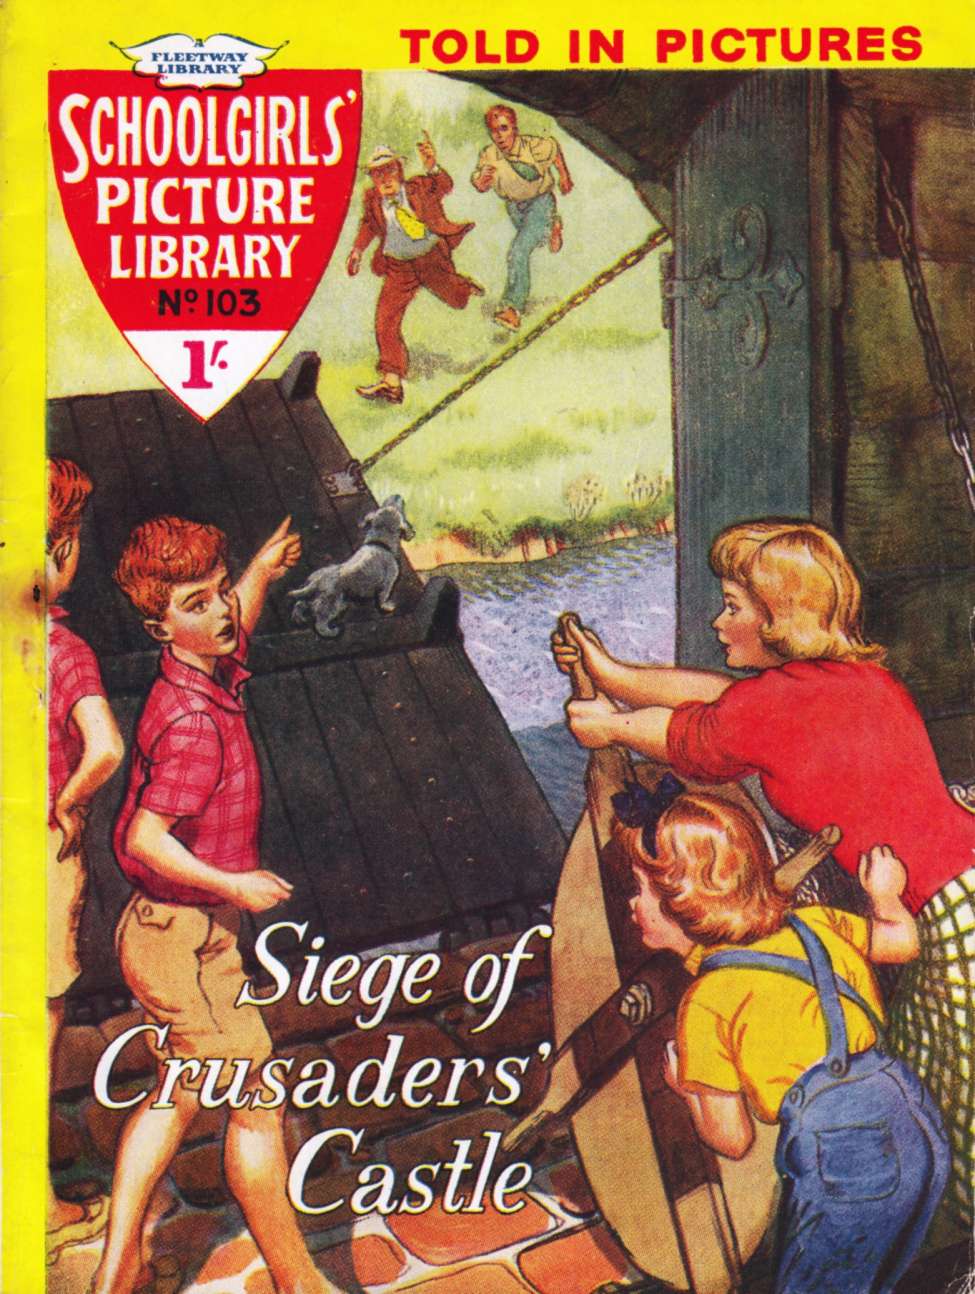 Comic Book Cover For Schoolgirls' Picture Library 103 - Siege of Crusaders' Castle